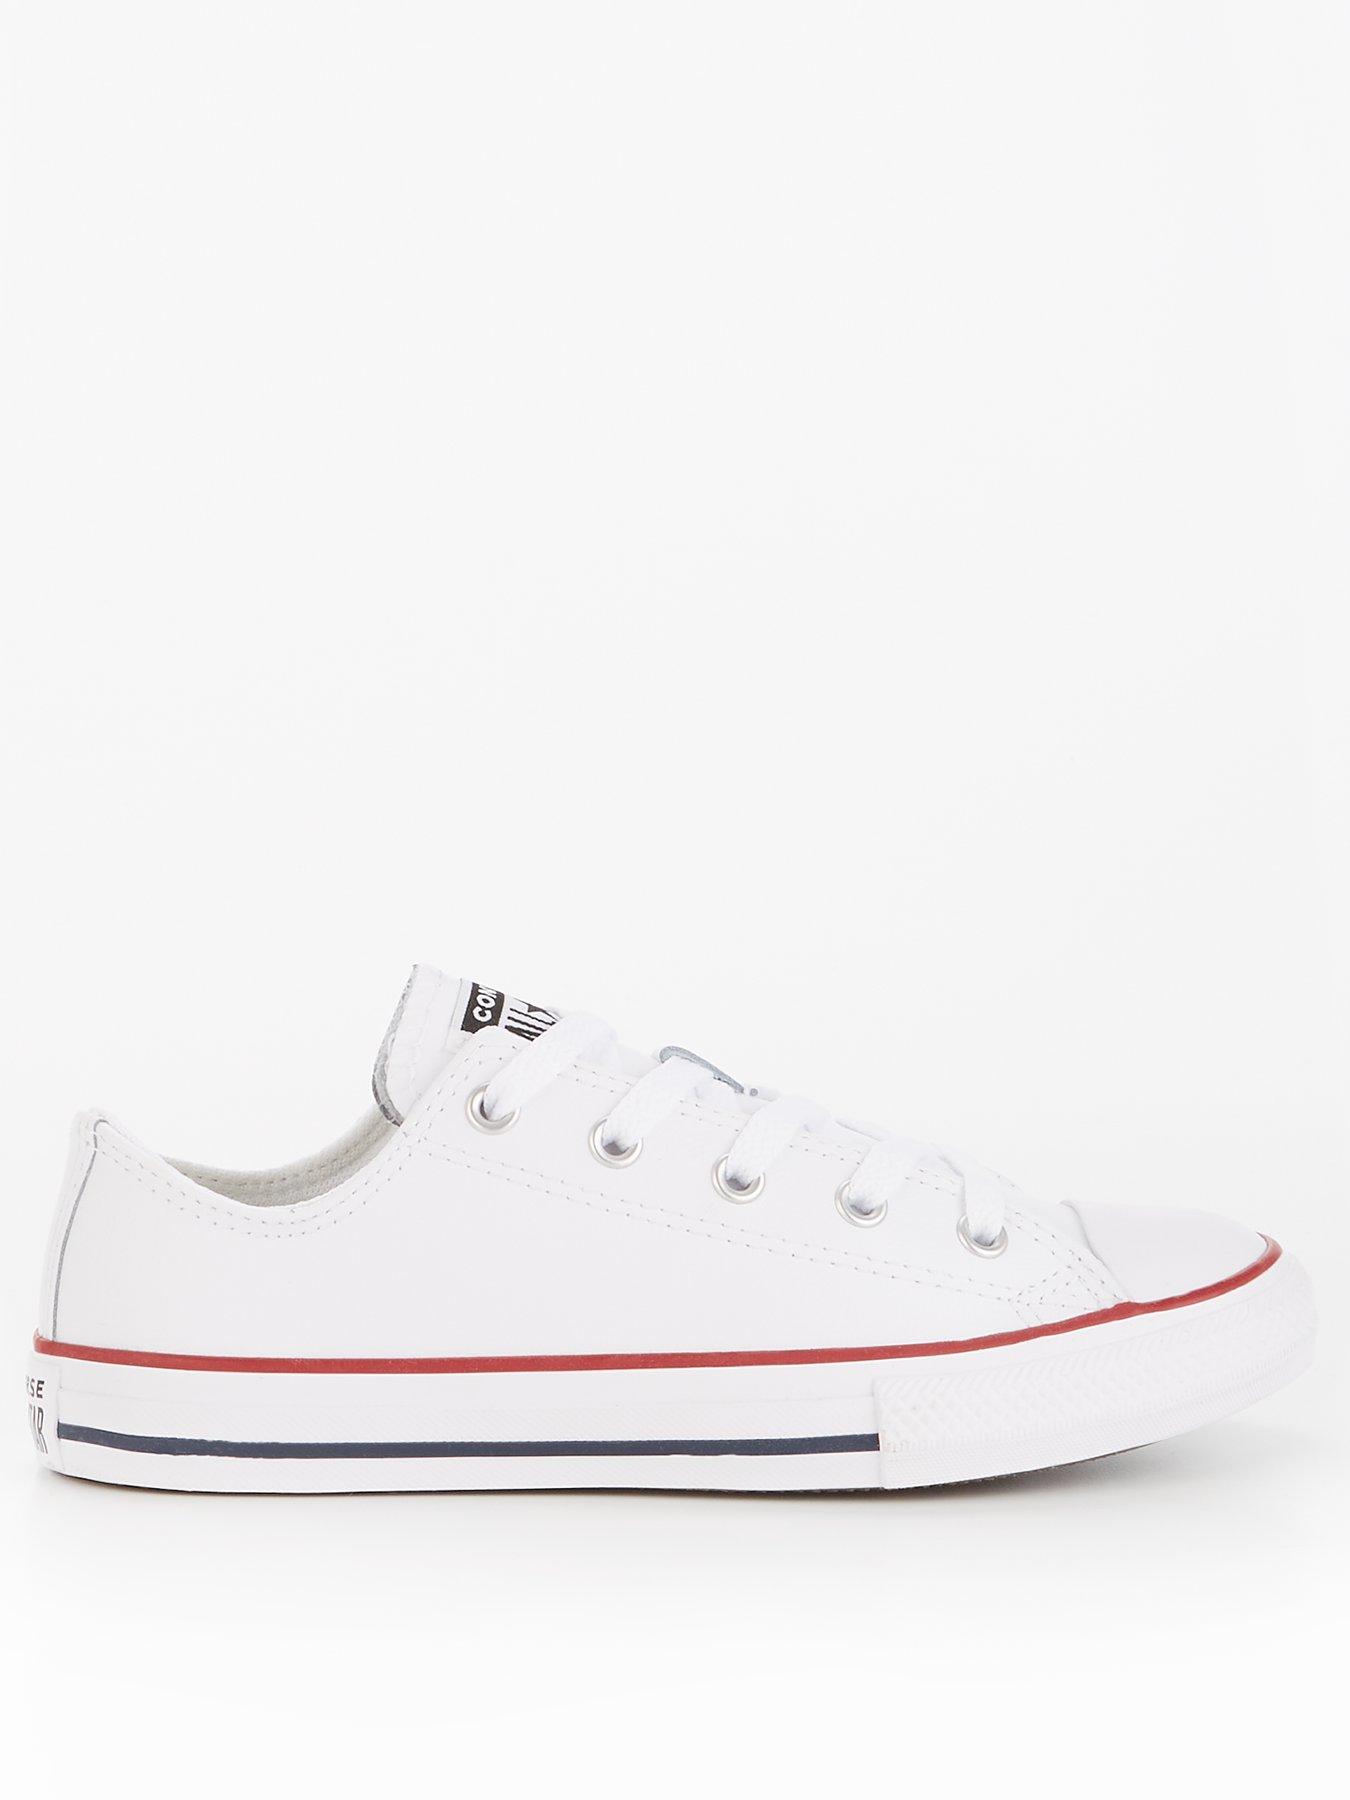 converse all star ox youth